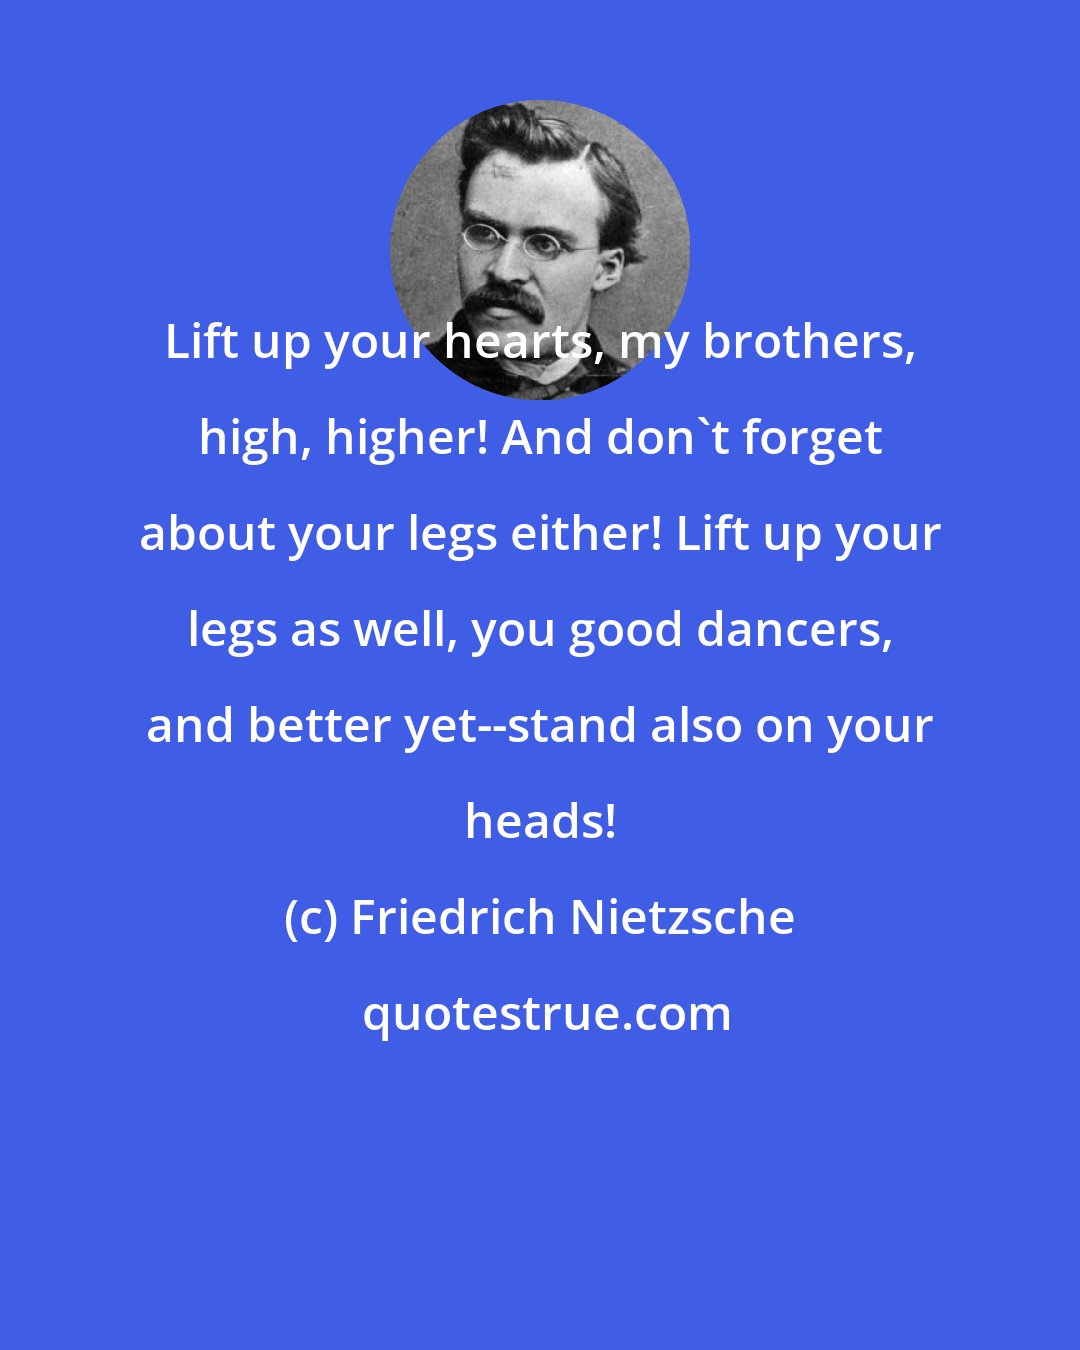 Friedrich Nietzsche: Lift up your hearts, my brothers, high, higher! And don't forget about your legs either! Lift up your legs as well, you good dancers, and better yet--stand also on your heads!